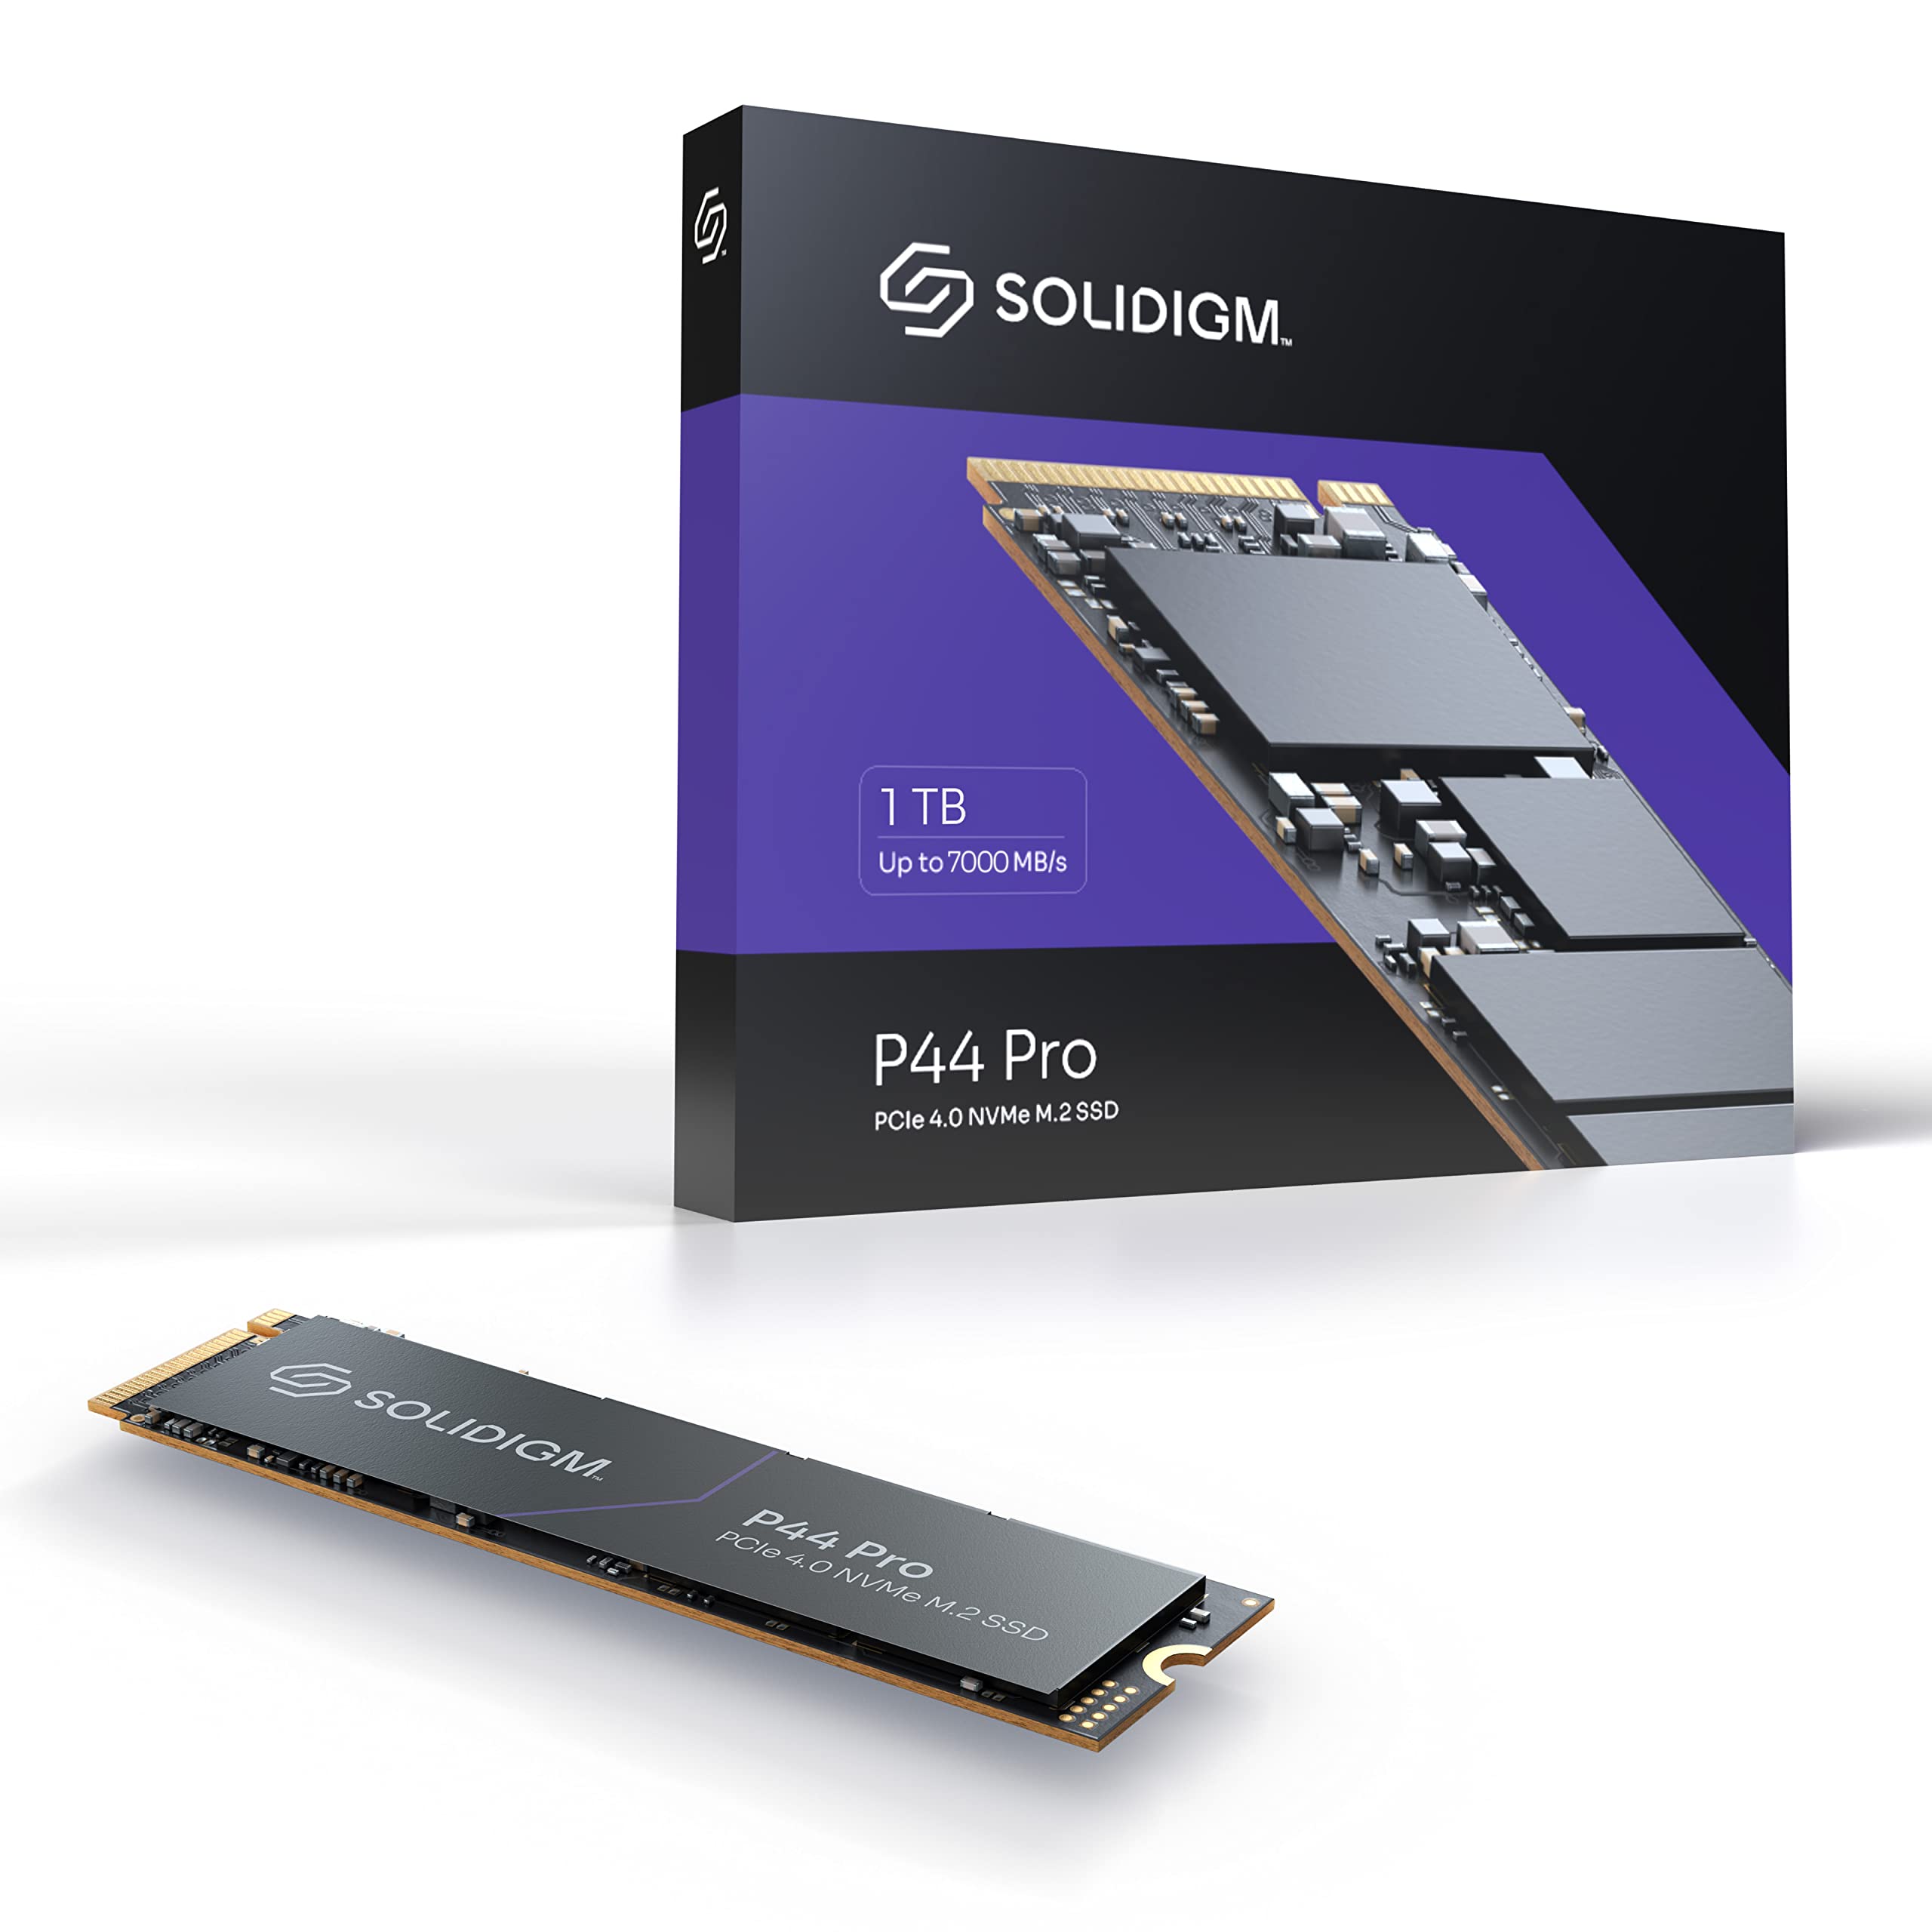 1TB Solidigm P44 Pro PCIe Gen4 NVMe 4.0 x4 M.2 2280 3D NAND Internal Solid State Drive $55 + Free Shipping